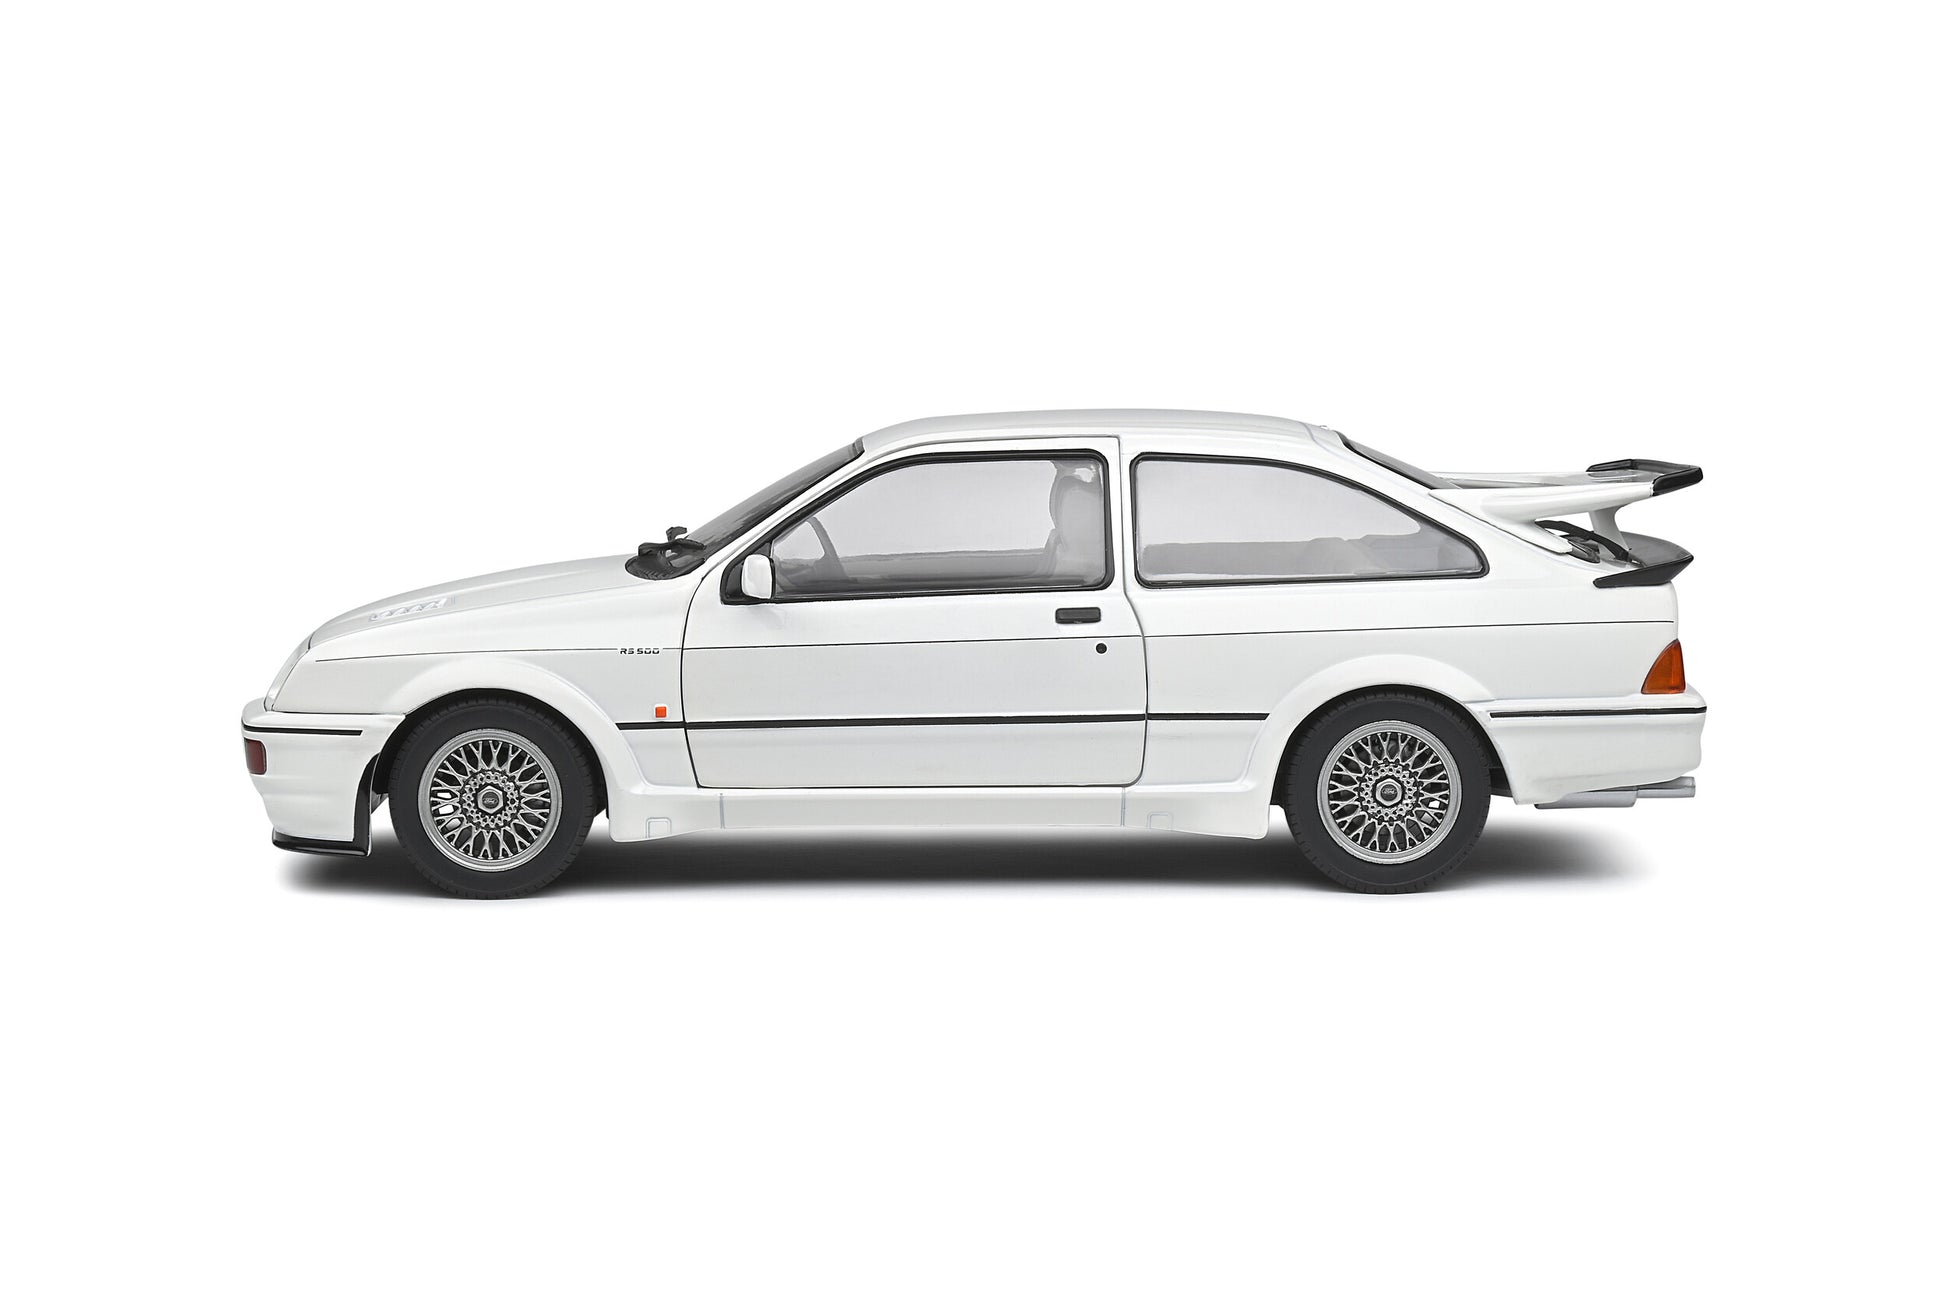 Solido 1:18 Ford Sierra Cosworth RS500 White - Chester Model Centre